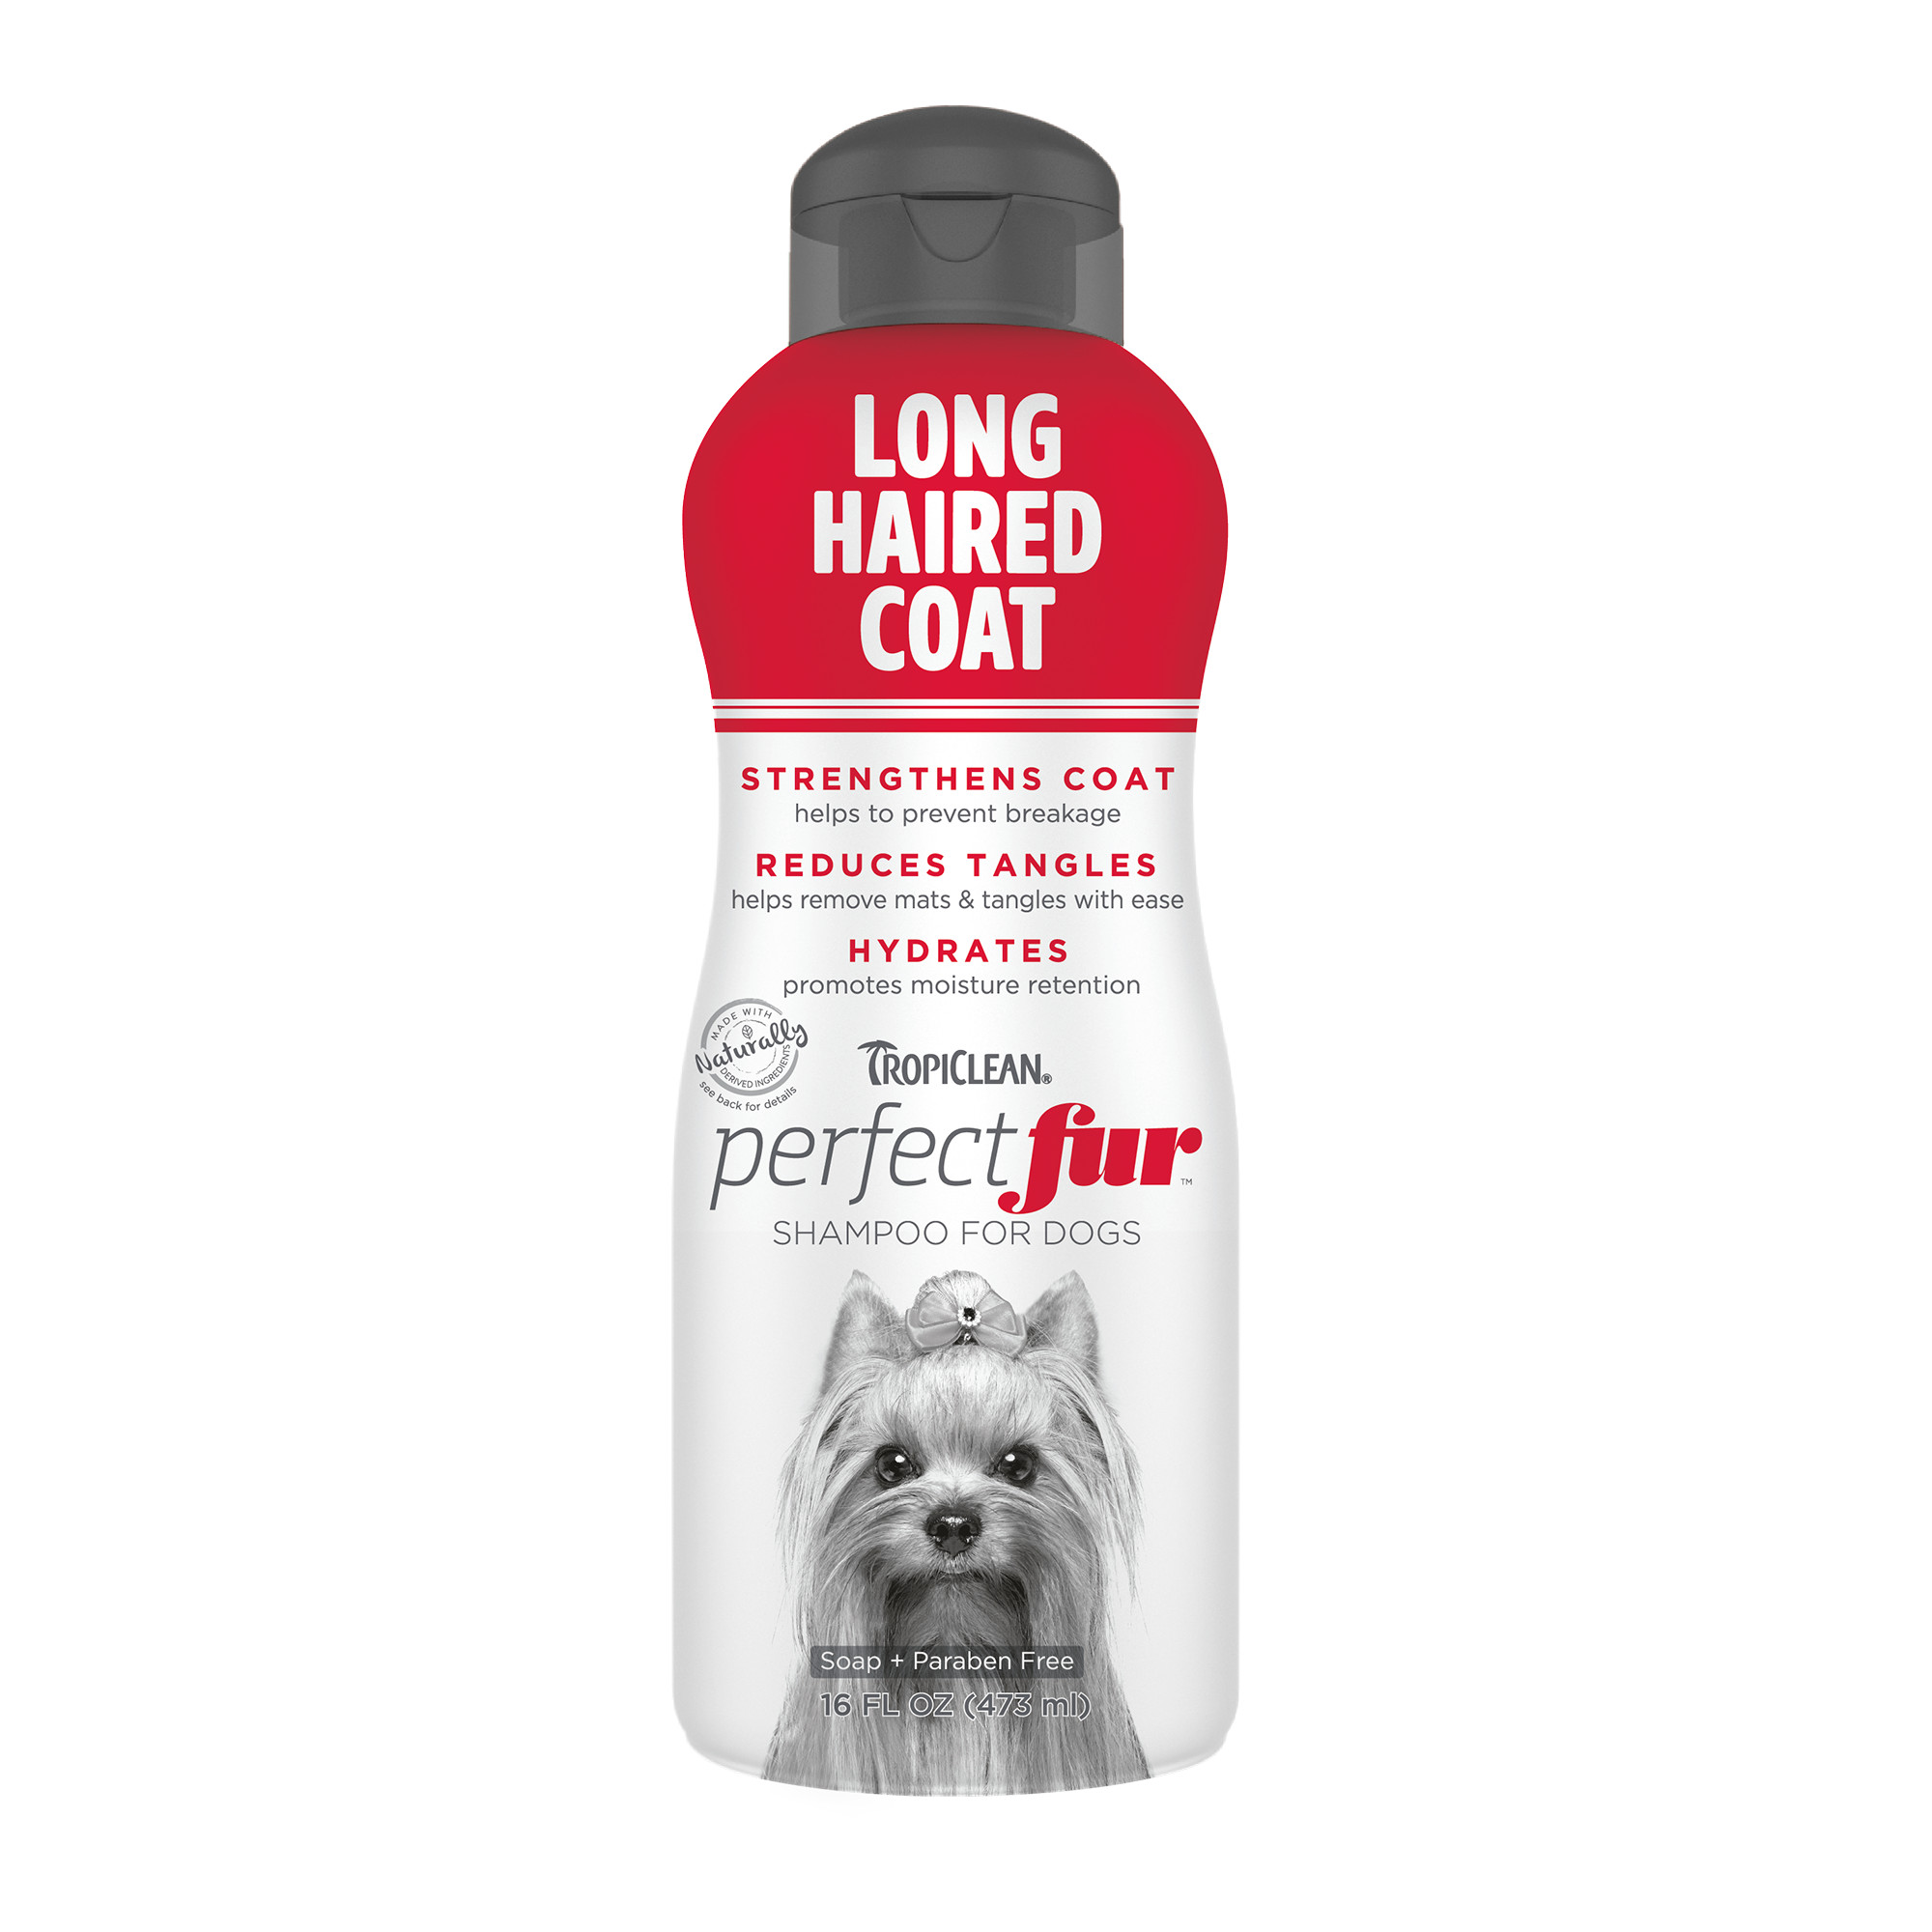 Long Haired Coat Shampoo for Dogs